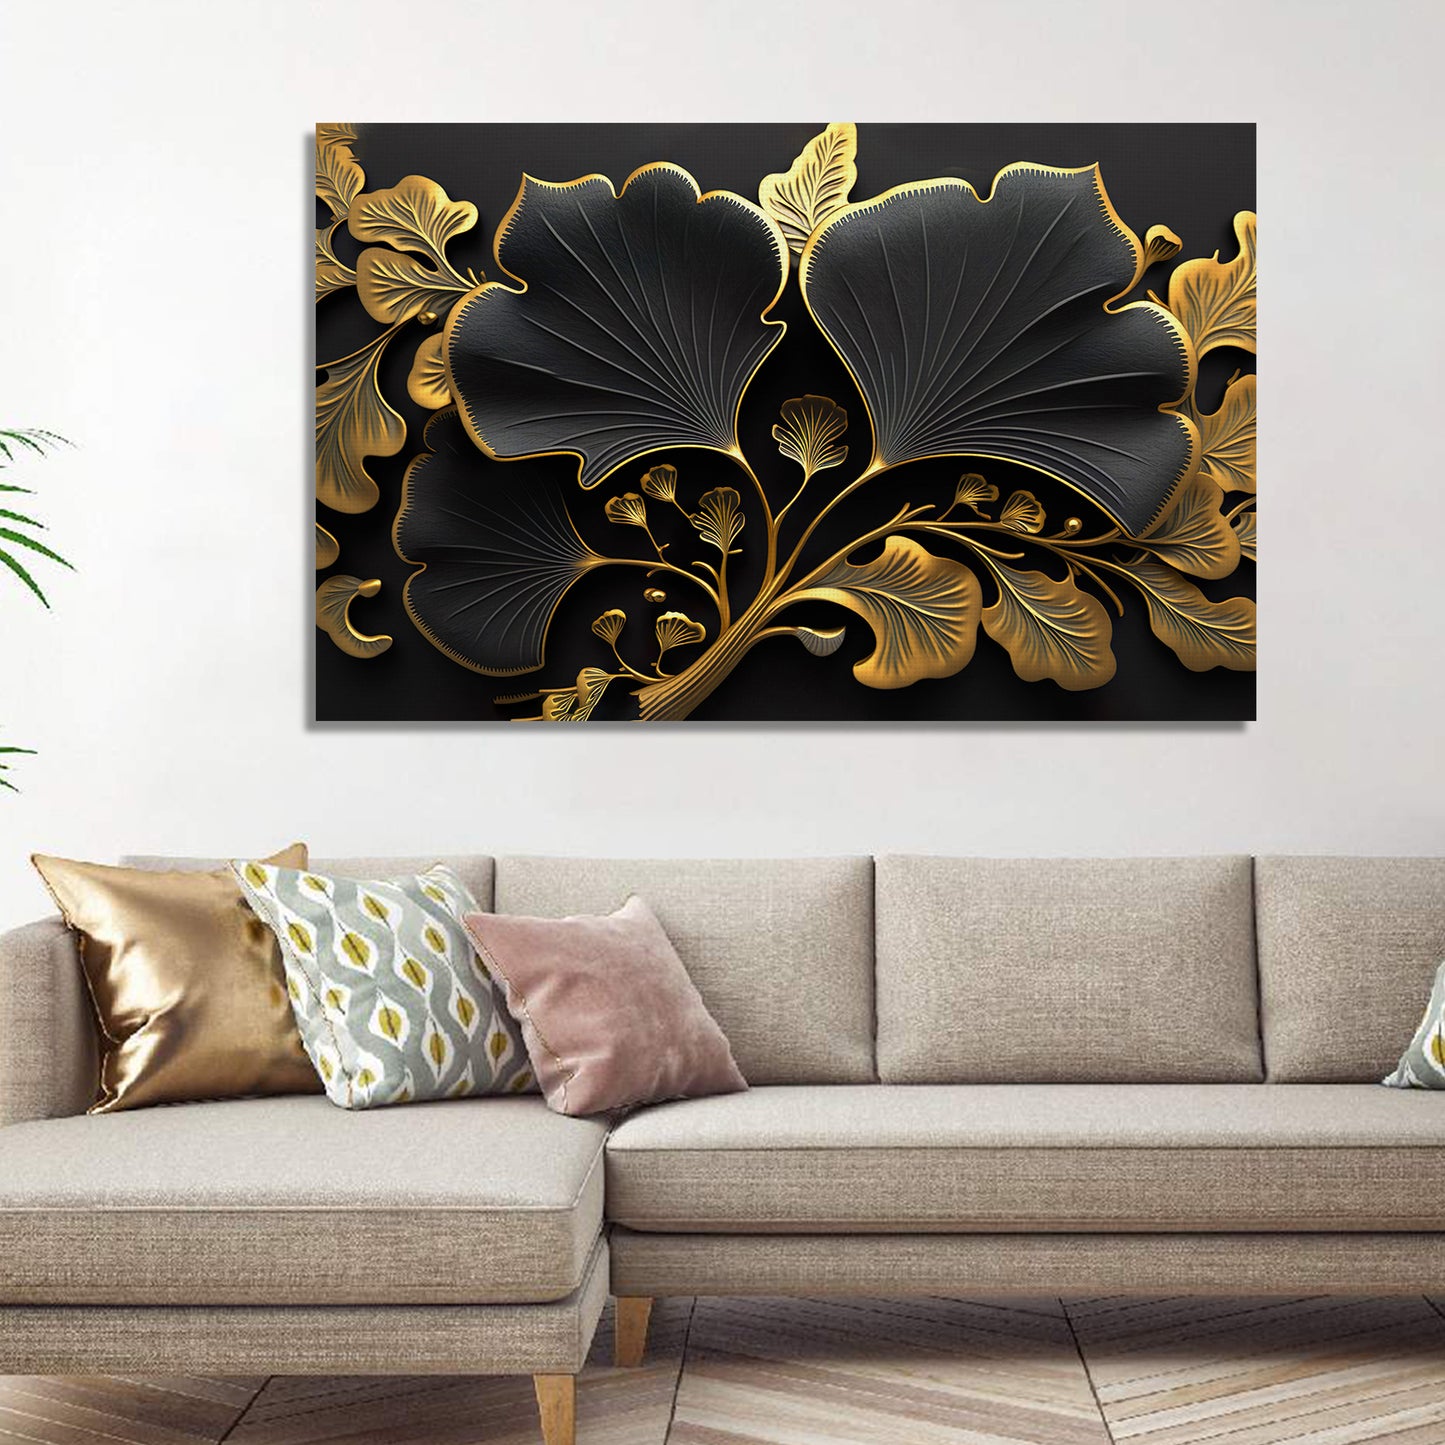 Luxury Black and Golden Flower Canvas Painting for Living Room Bedroom Home Wall Decor